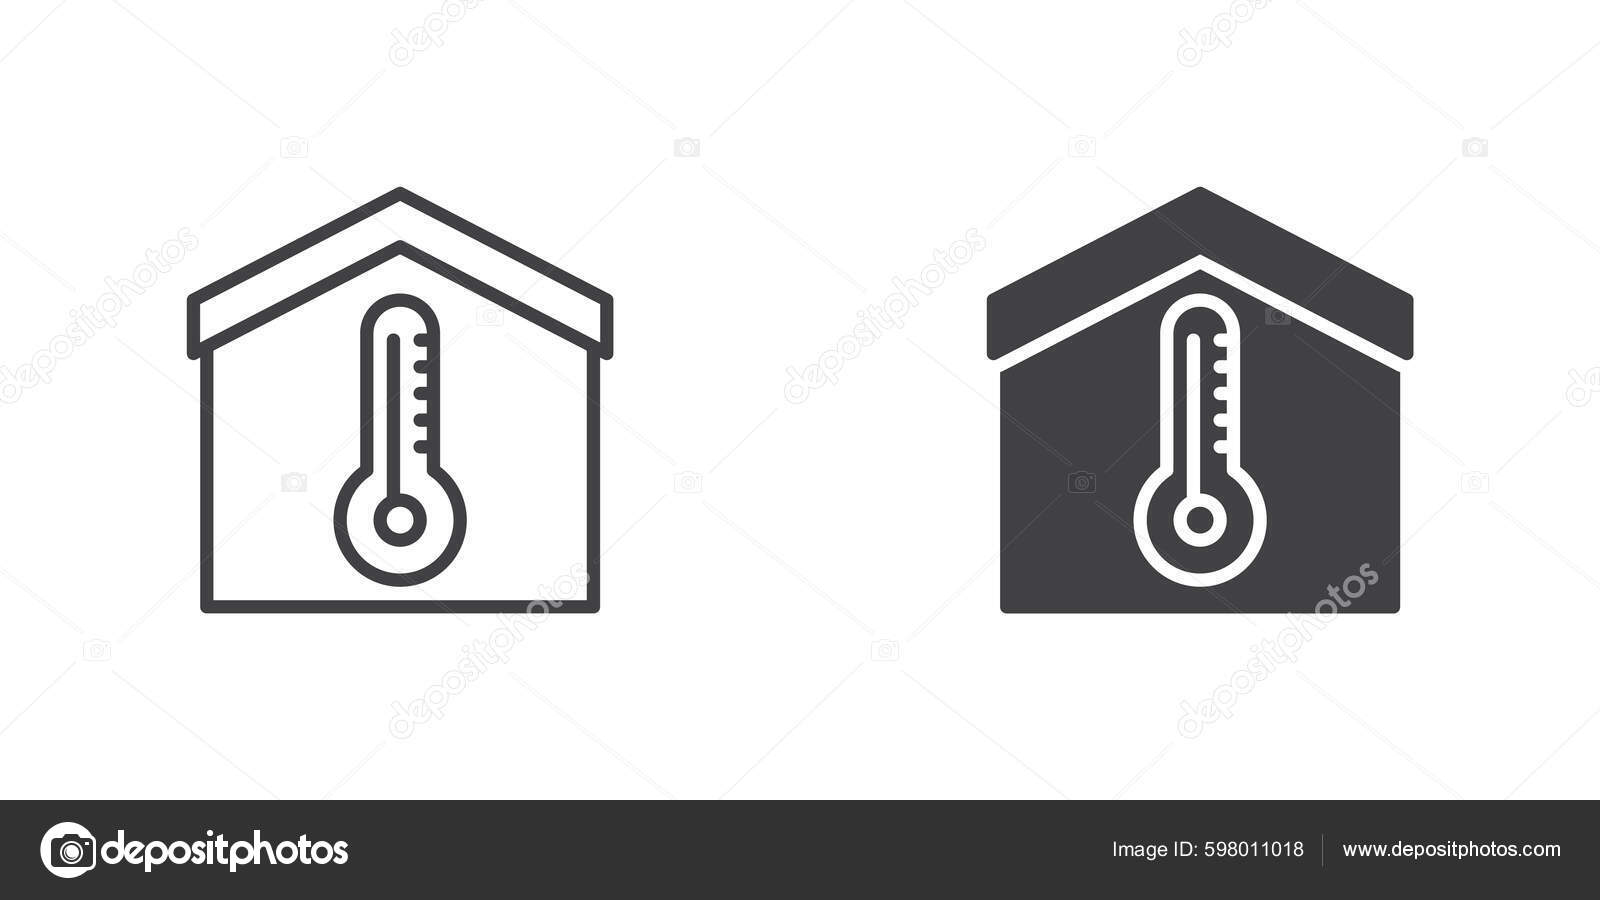 House with thermometer icon air conditioning Vector Image